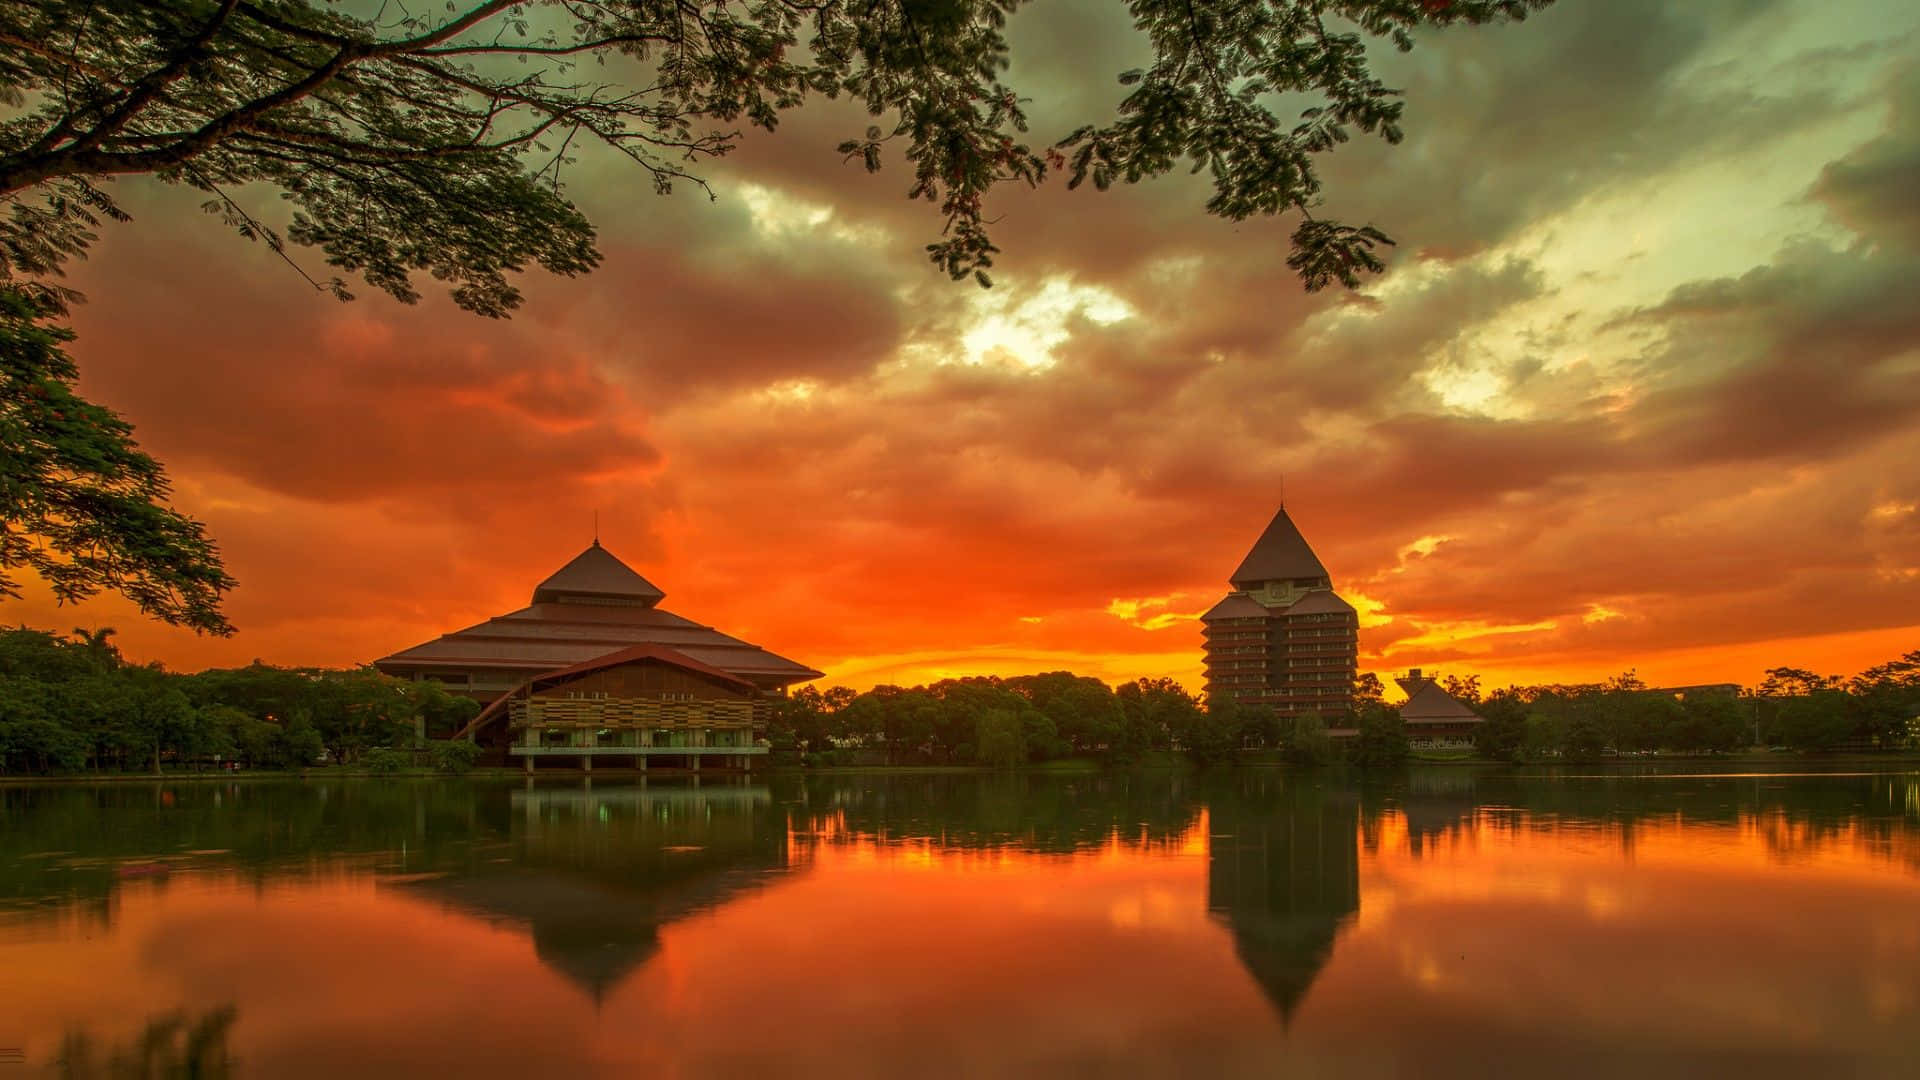 A Sunset Over A Lake With A Tower In The Background